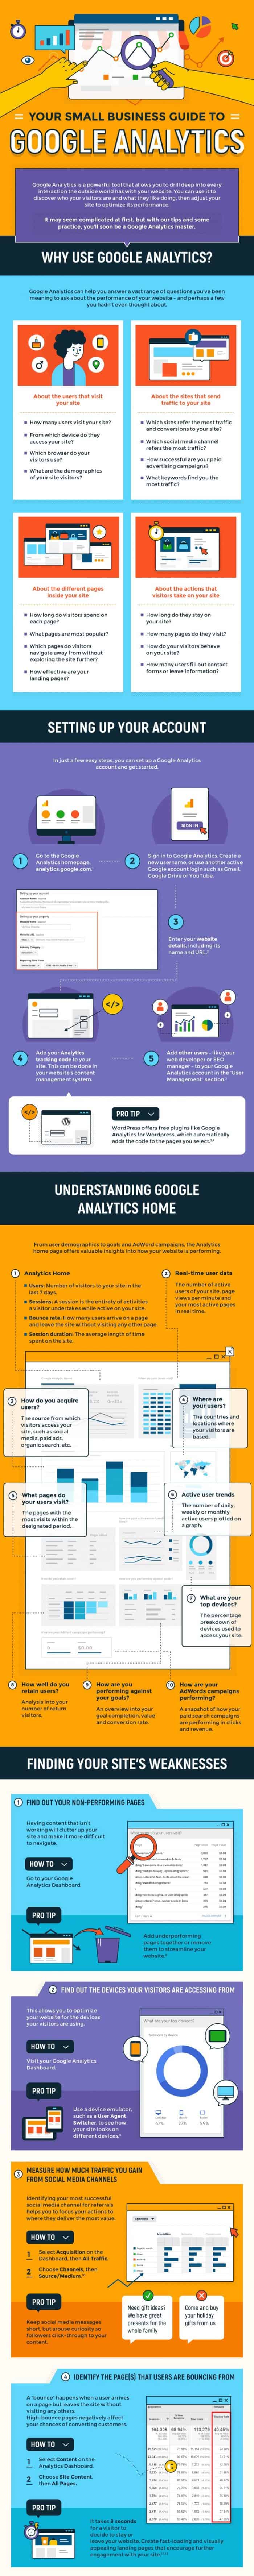 Google Analytics Can Work For You